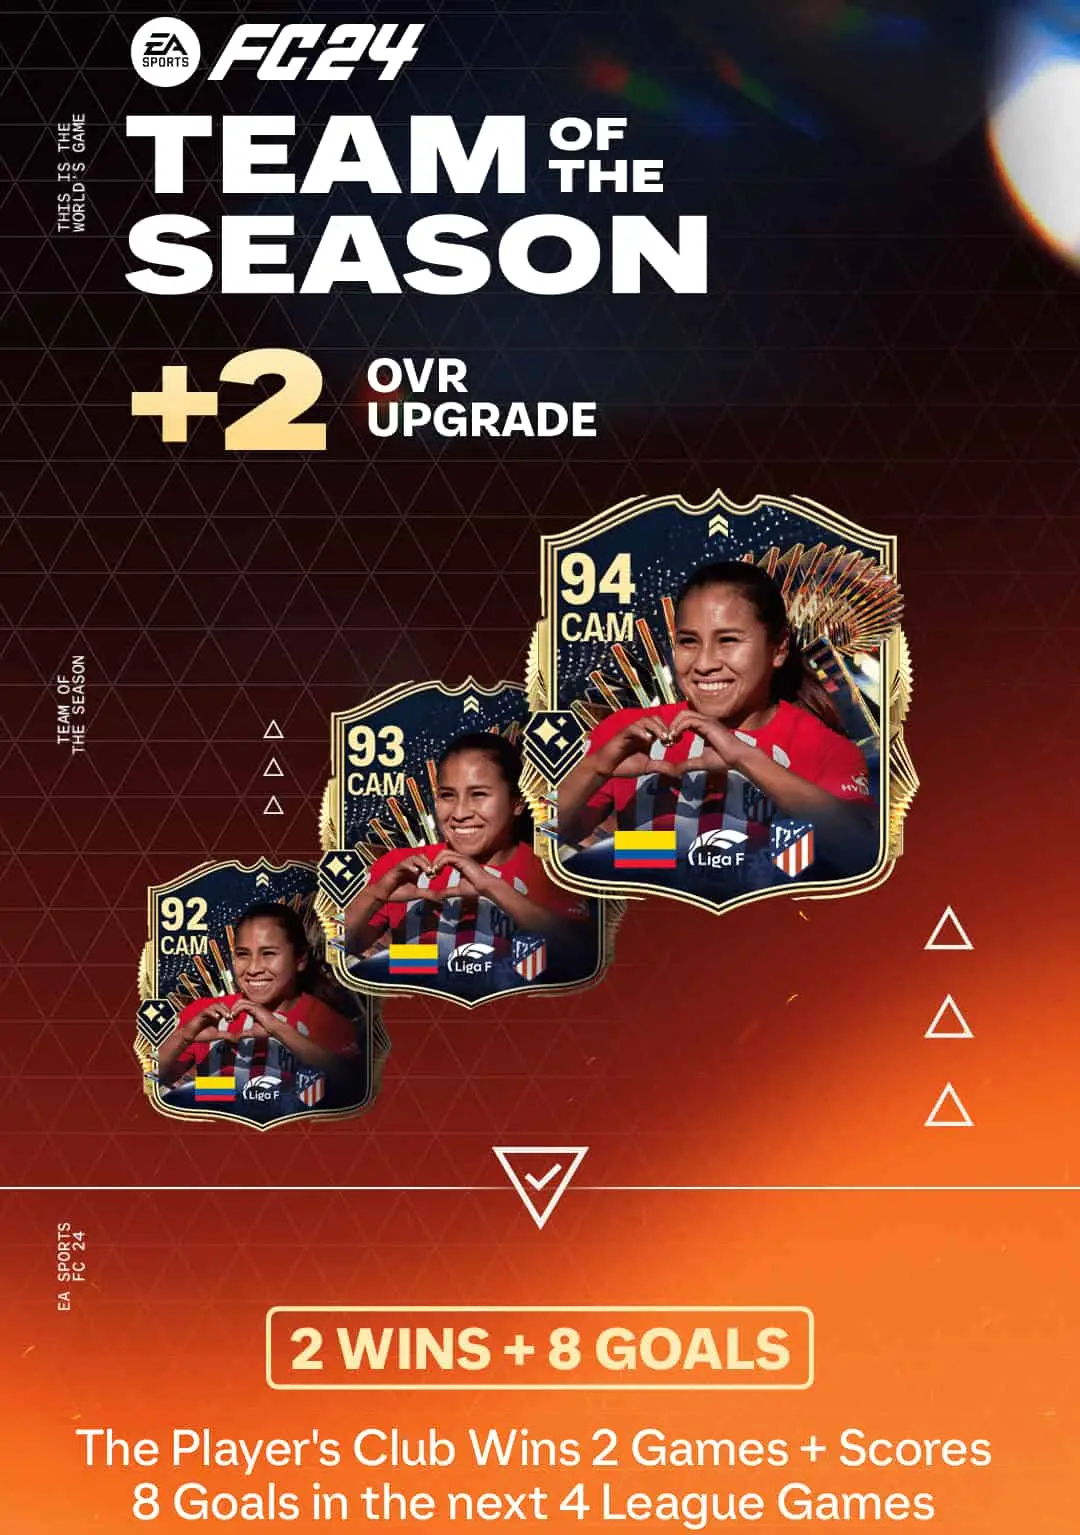 Three Leicy Santos EA FC 24 TOTS Live cards with upgrades on a blue-orange background.